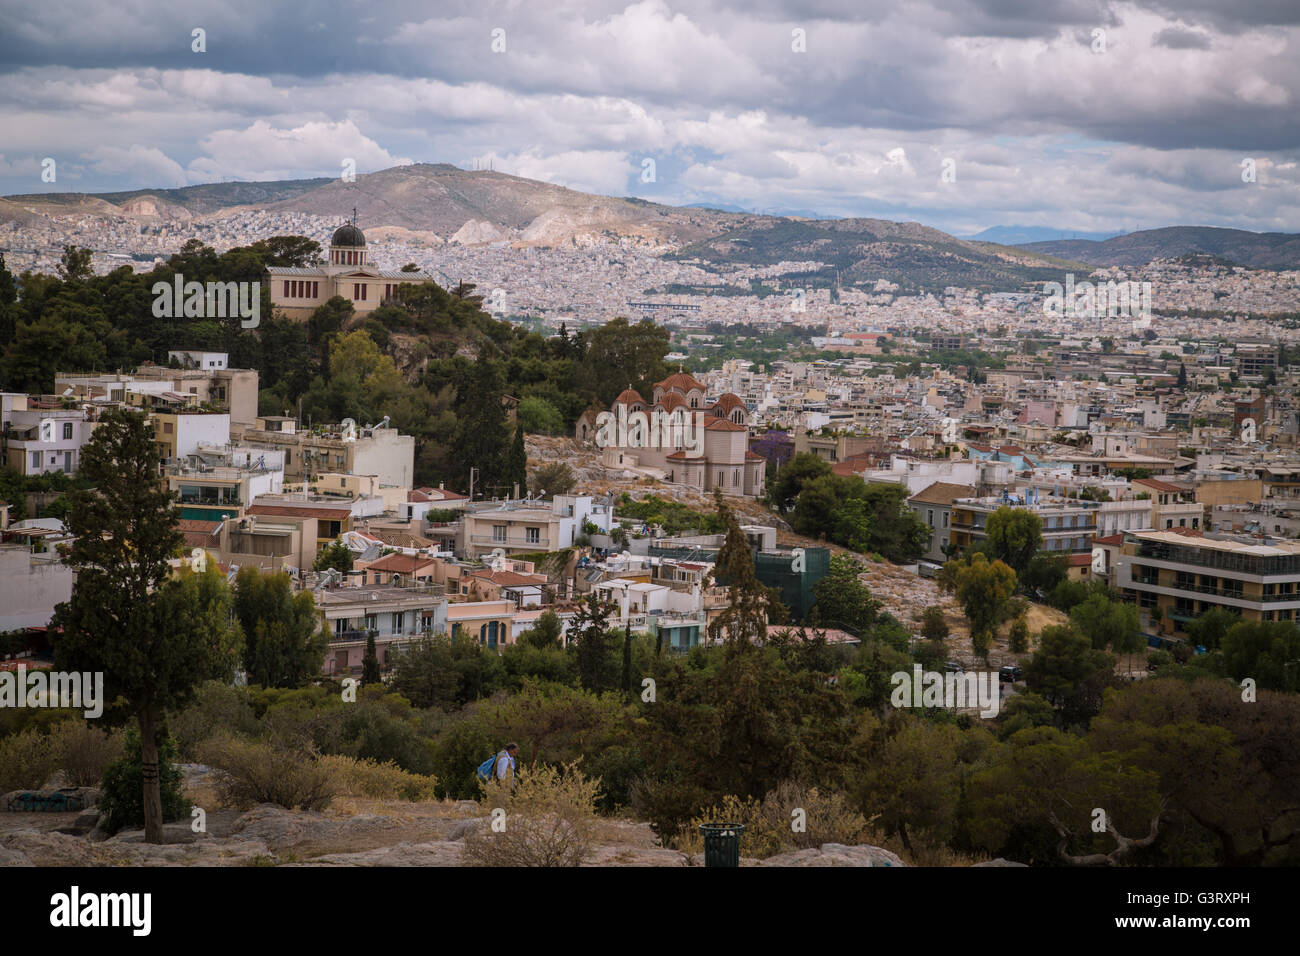 A hilltop view of Athens from the top of Aeropagus Hill, looking down towards the center and eastern suburbs of the city. Stock Photo